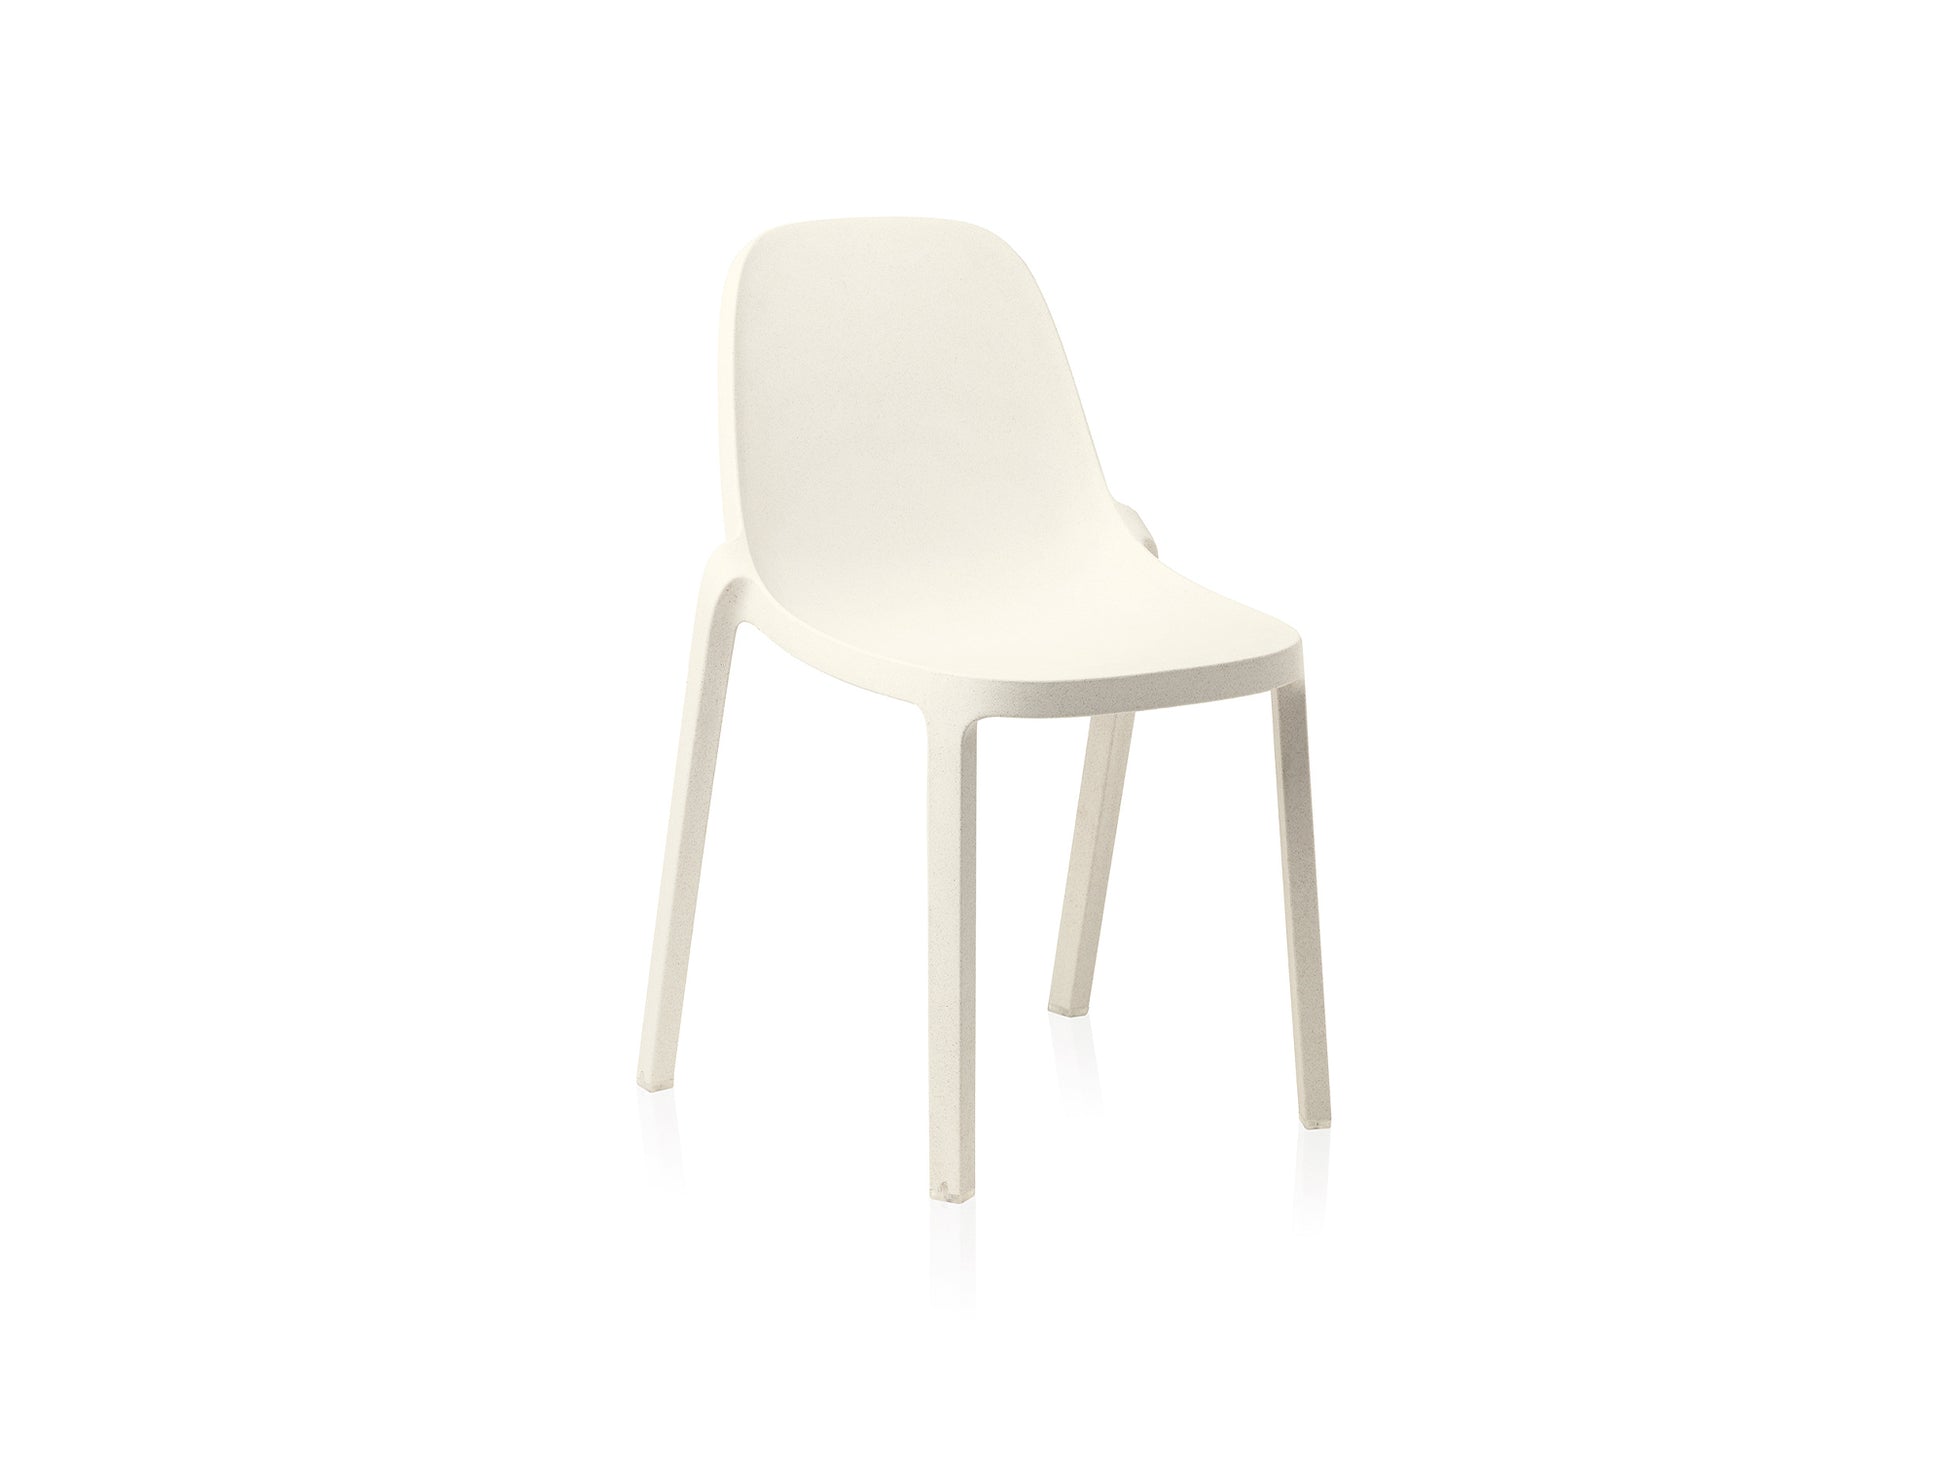 Emeco  Broom Stacking Chair - White